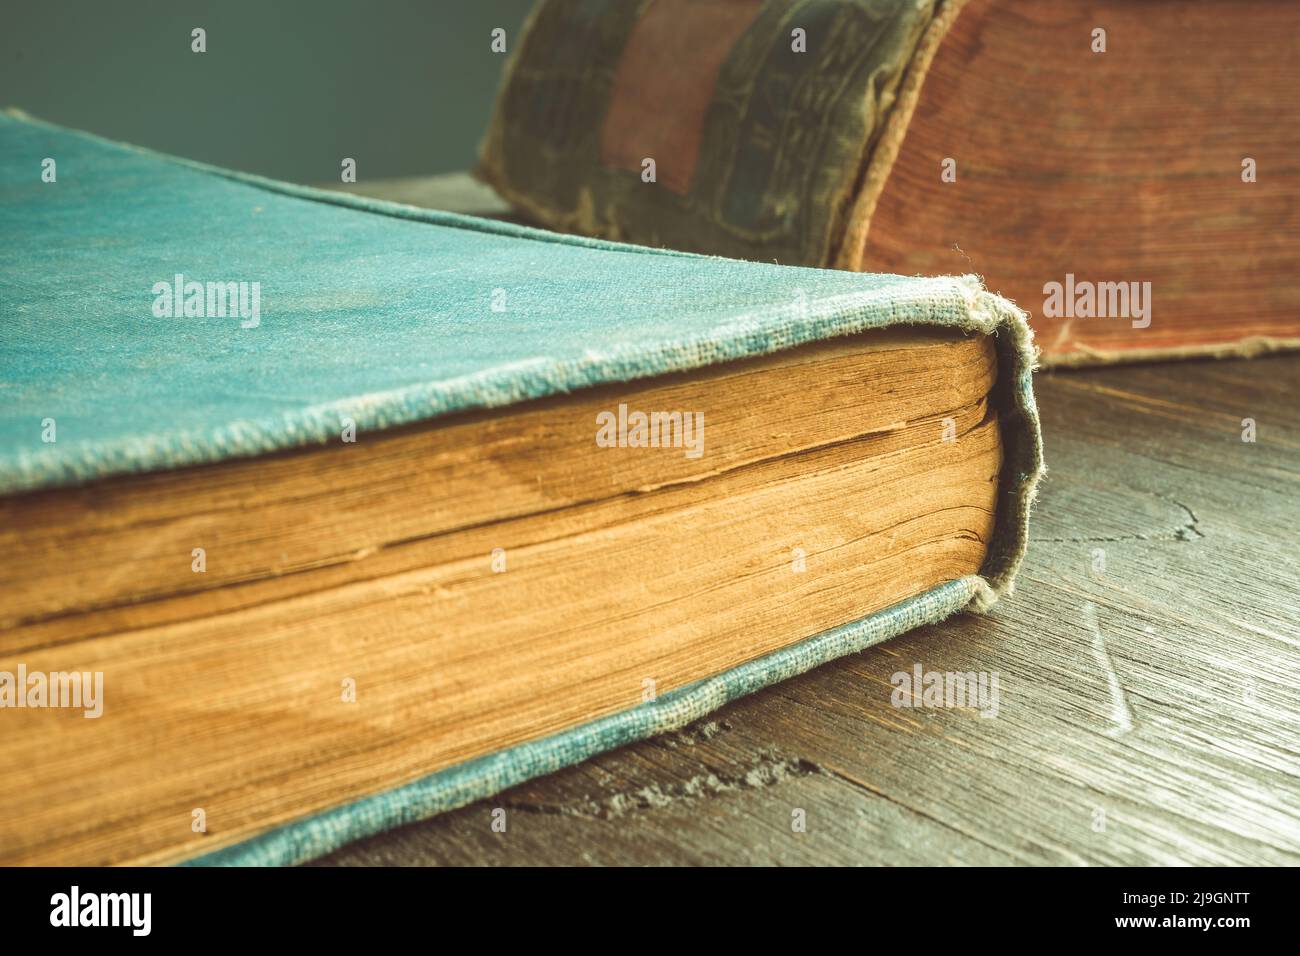 Close-up of old books lying on the table. Stock Photo